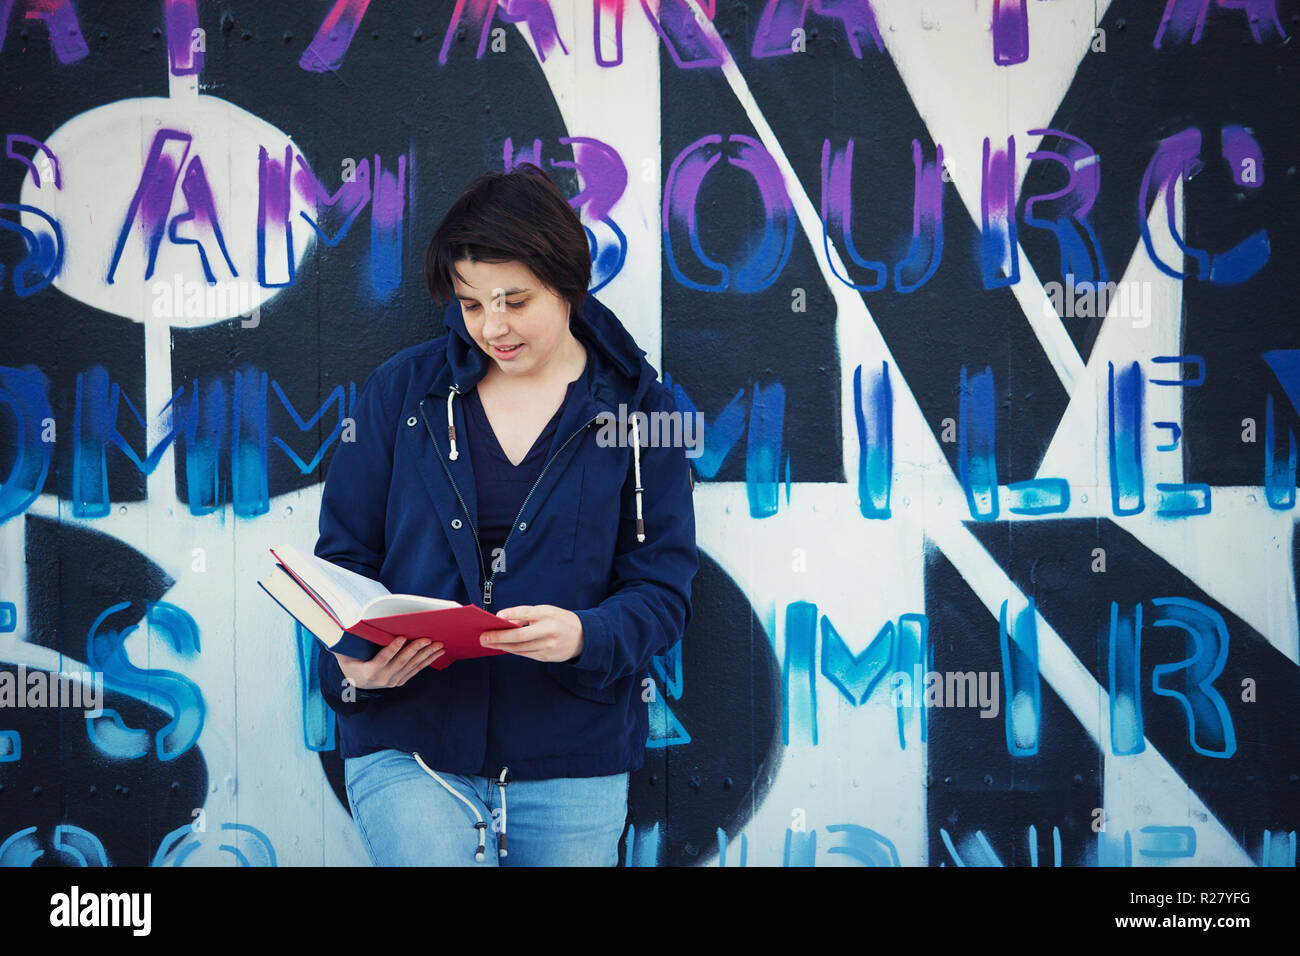 Casual woman student reading book, outdoors lifestyle portrait leaning back on graffiti wall background. Stock Photo